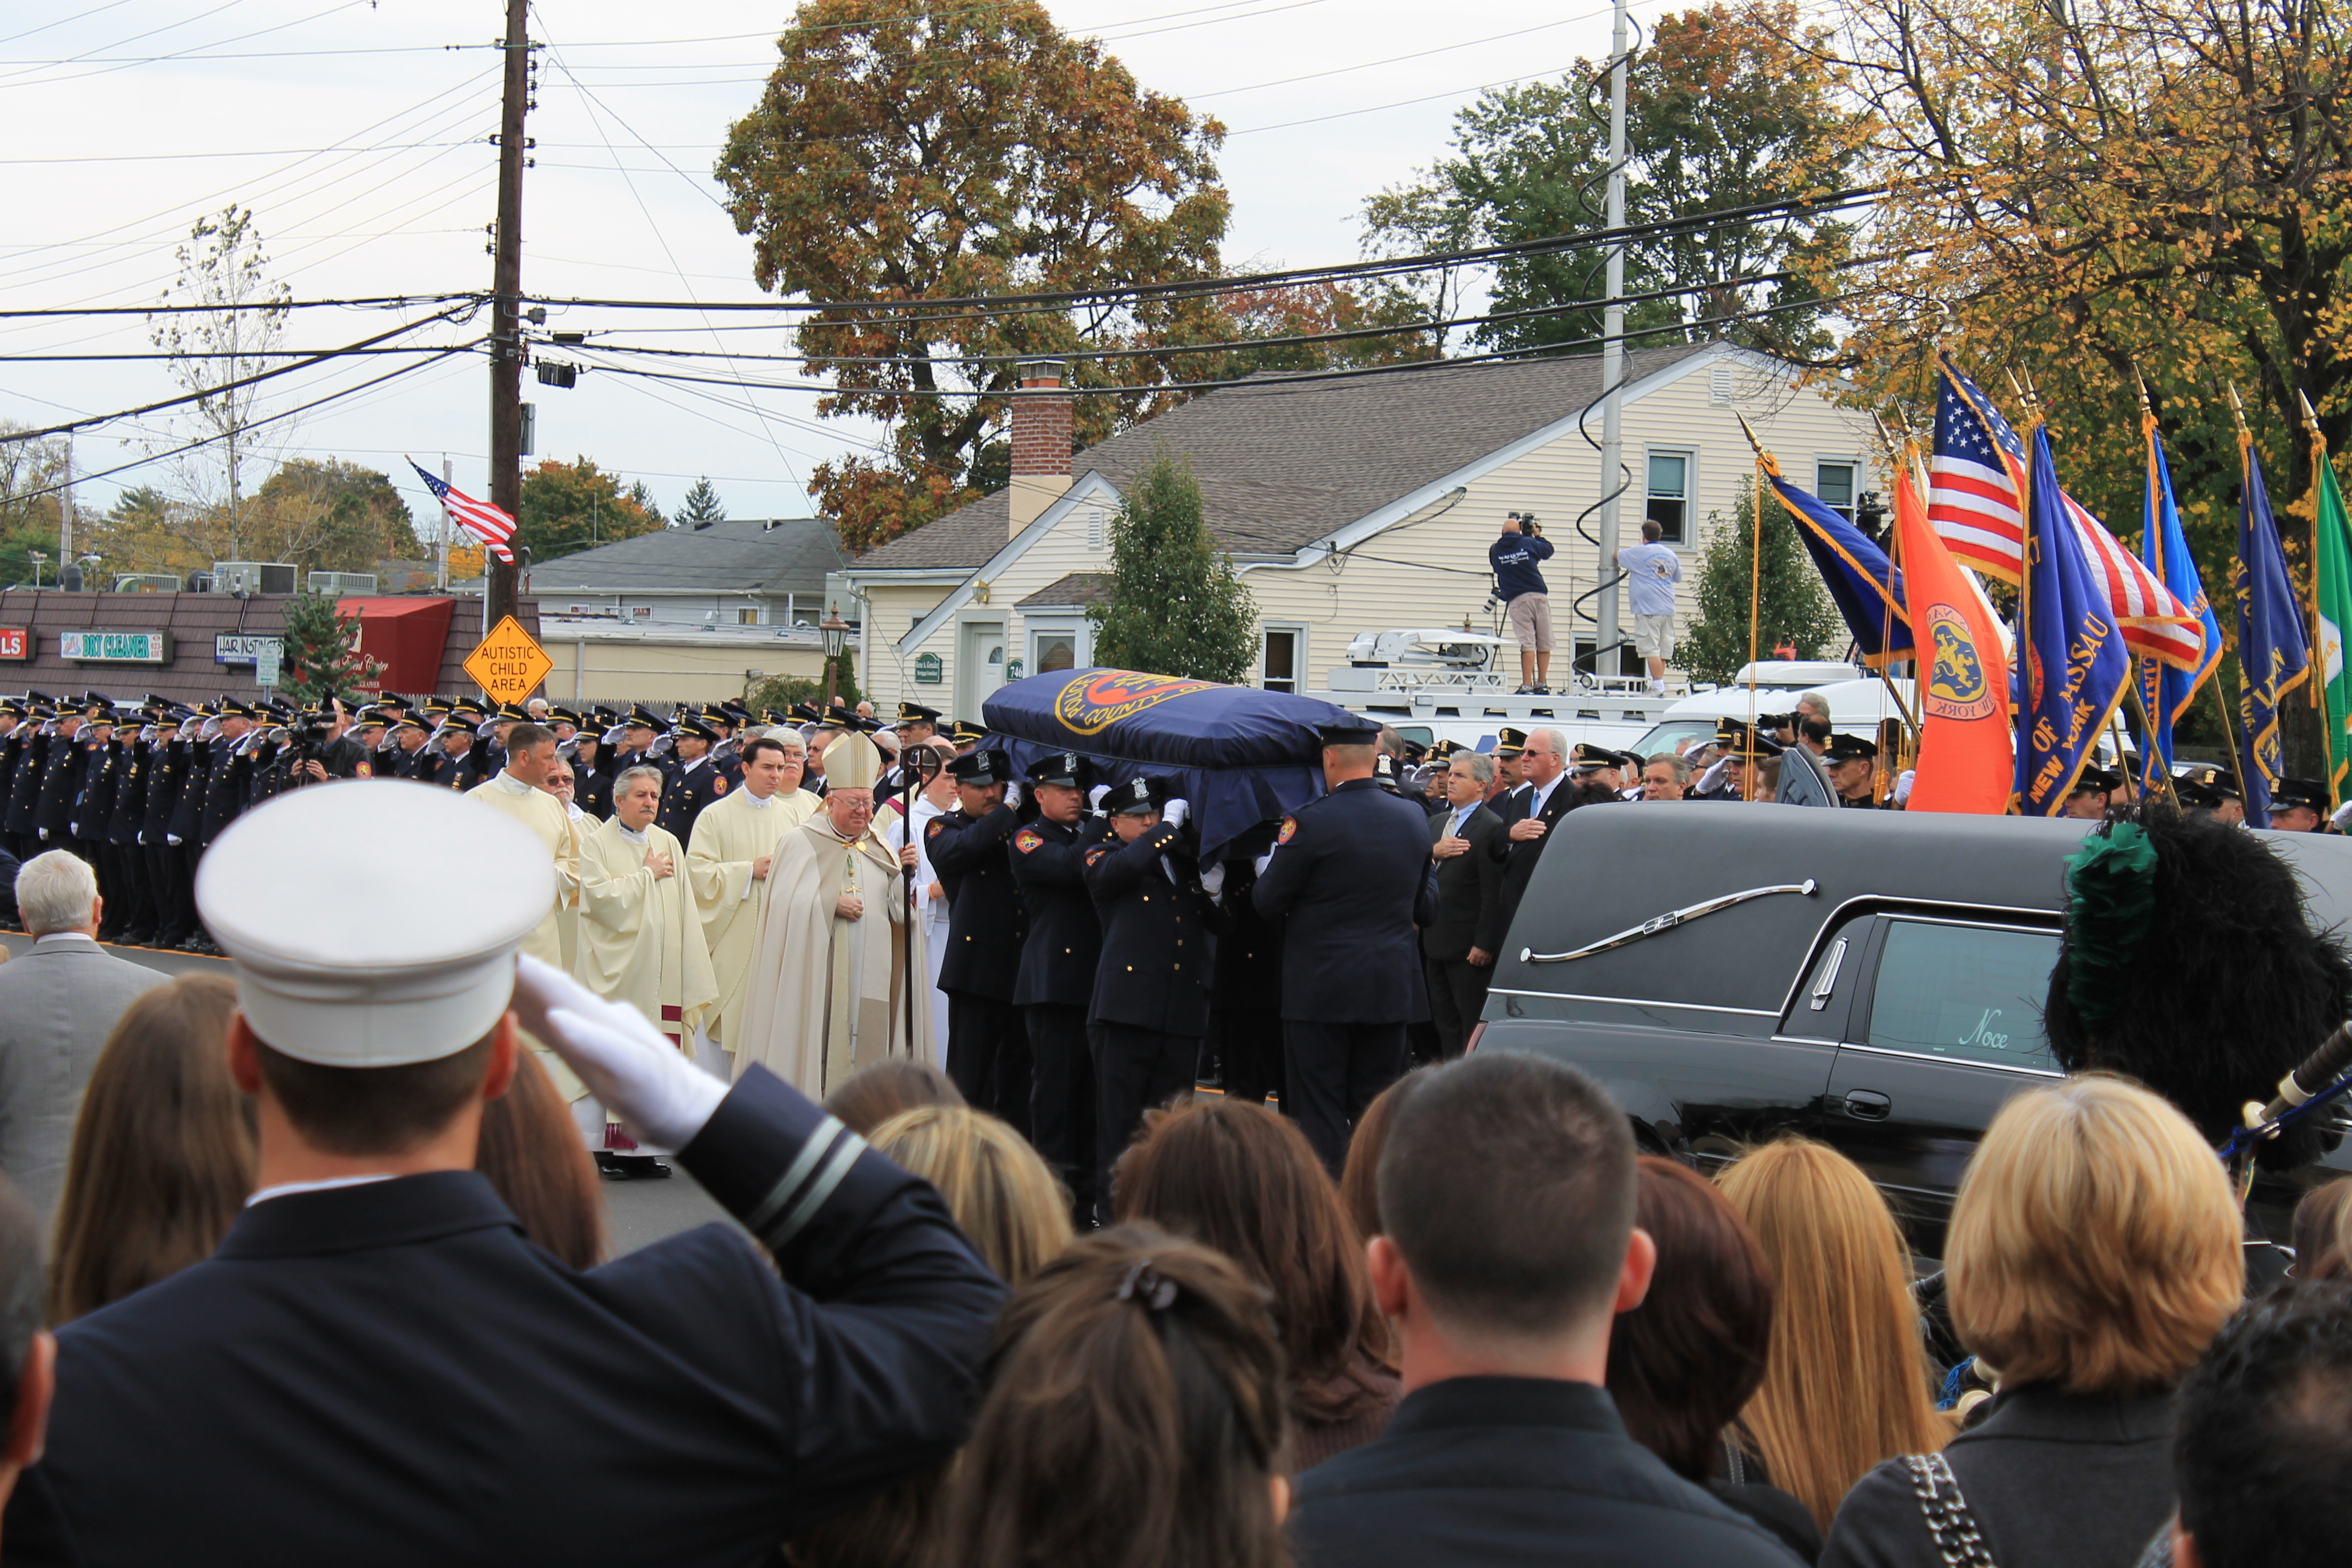 Sea of Blue: Hundreds of Nassau County police officers joined law enforcement agencies from across the region Saturday outside St. Christopher's Church in Baldwin to pay respects to Nassau Police Officer Arthur Lopez, who was gunned down Tuesday in Bellerose Terrace after making a routine traffic stop. (Rashed Mian/Long Island Press)